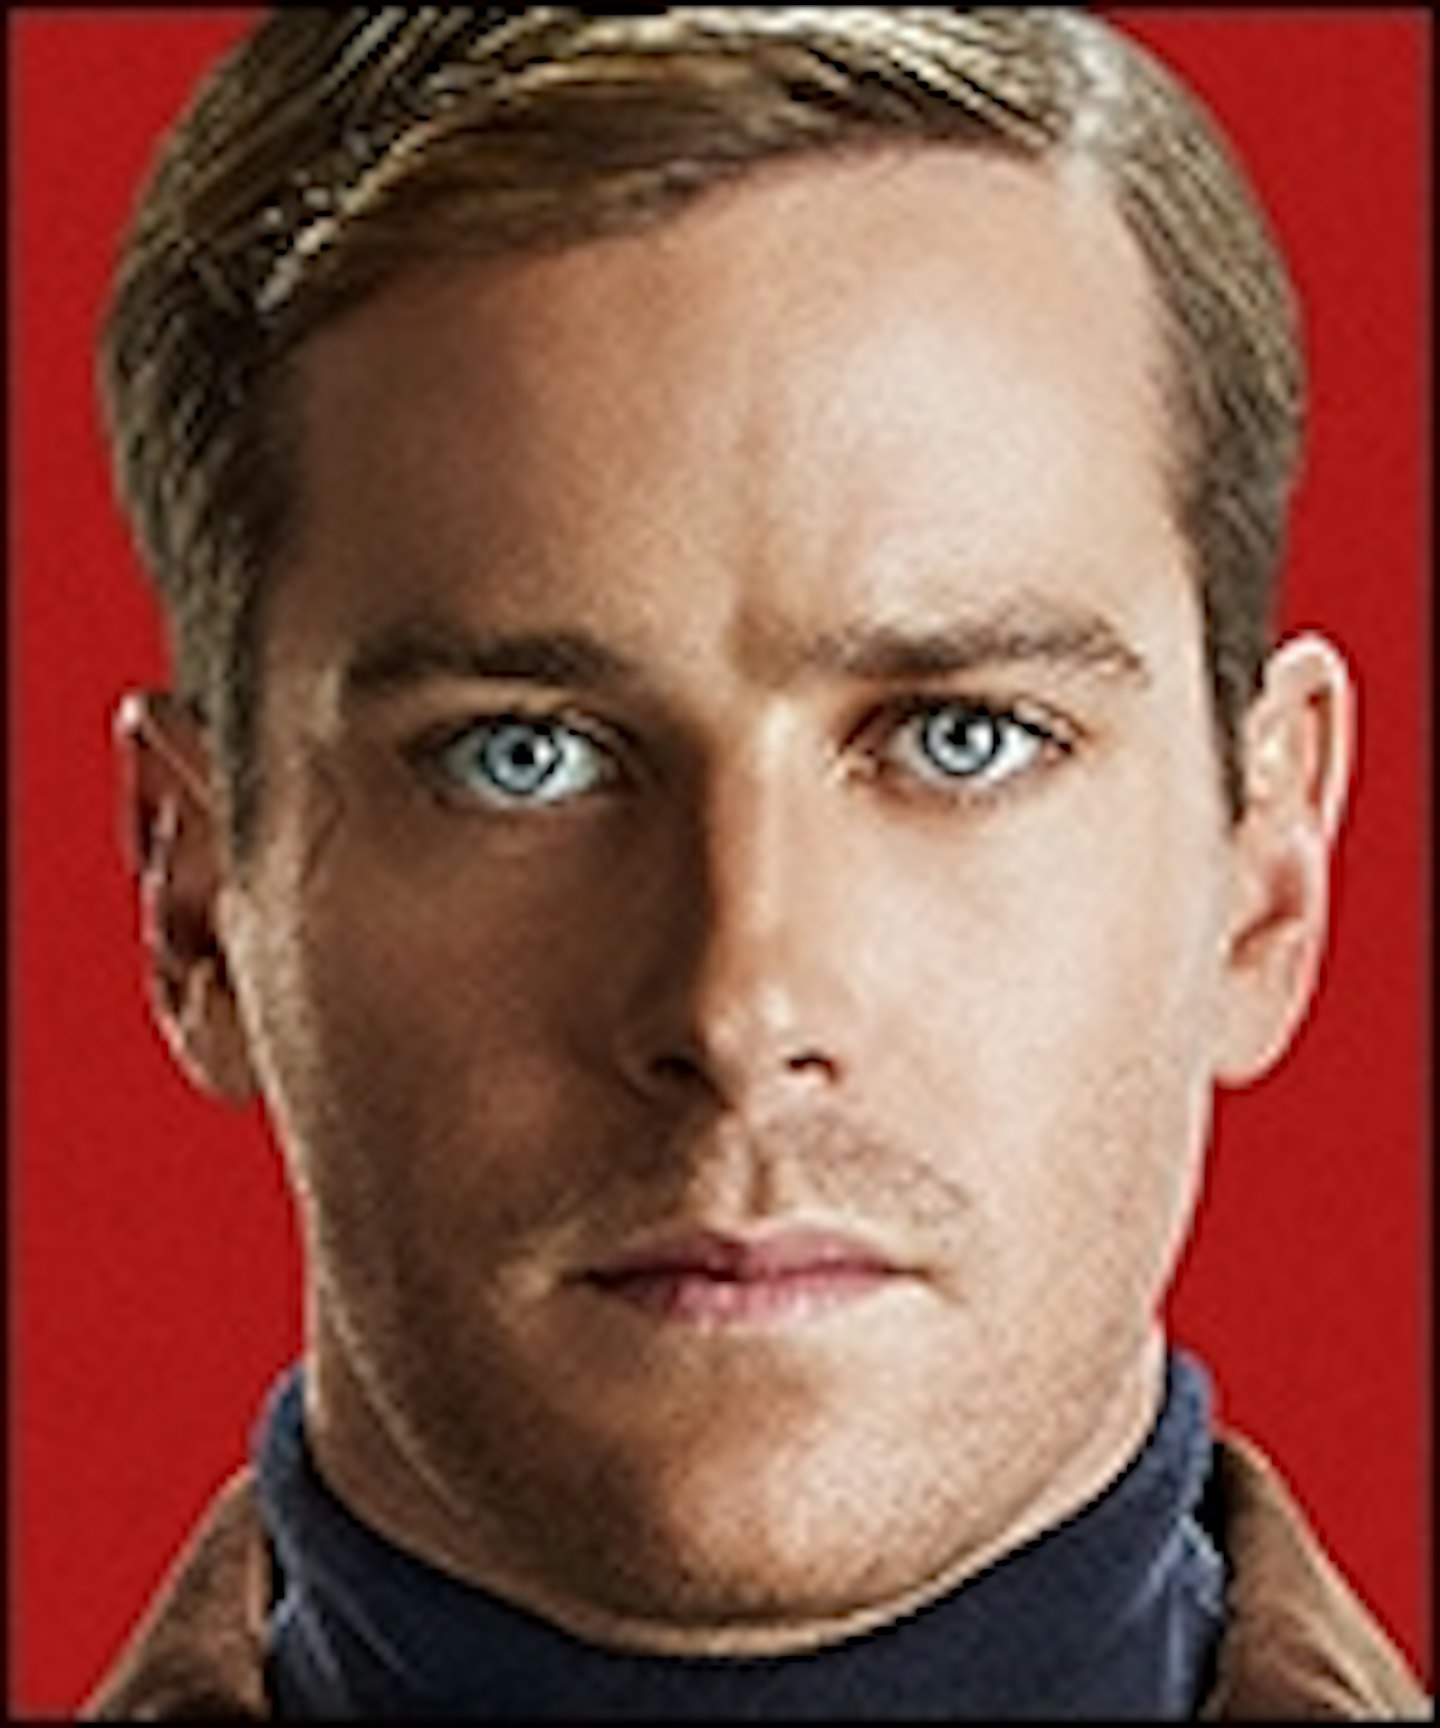 New Man From U.N.C.L.E. Character Posters Land